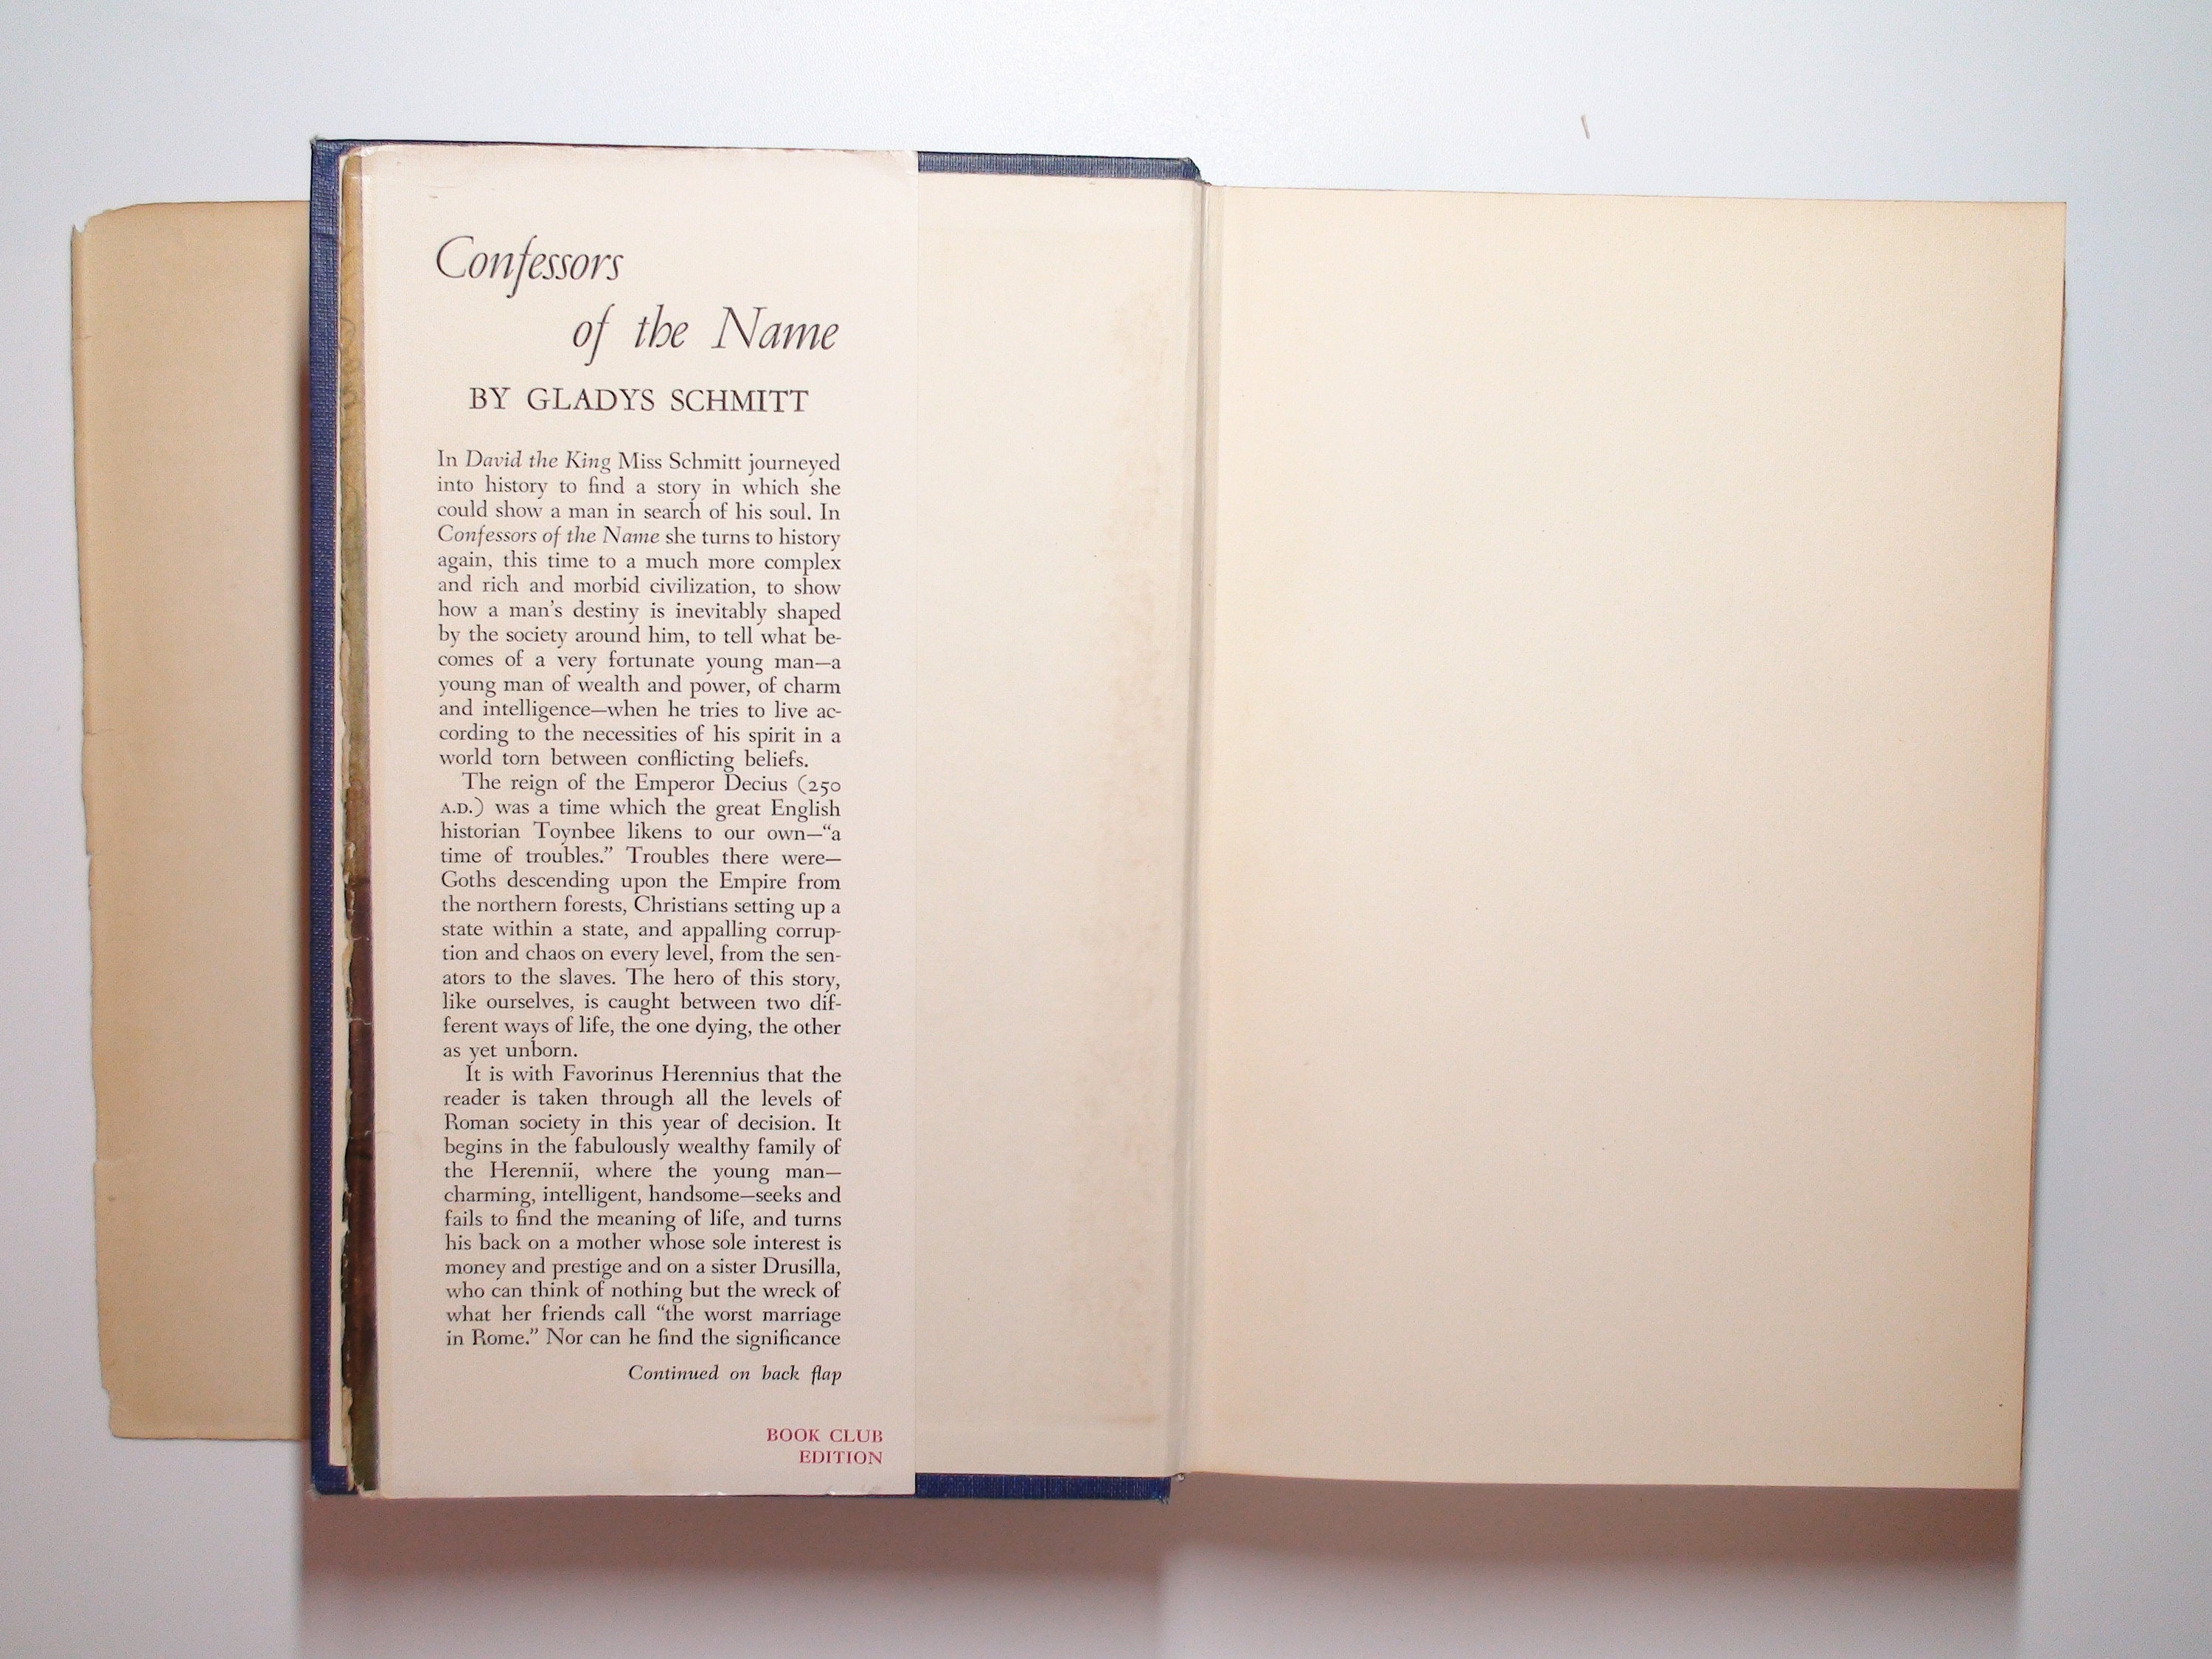 Confessors of the Name, by Gladys Schmitt, Vintage Historical Novel, 1952